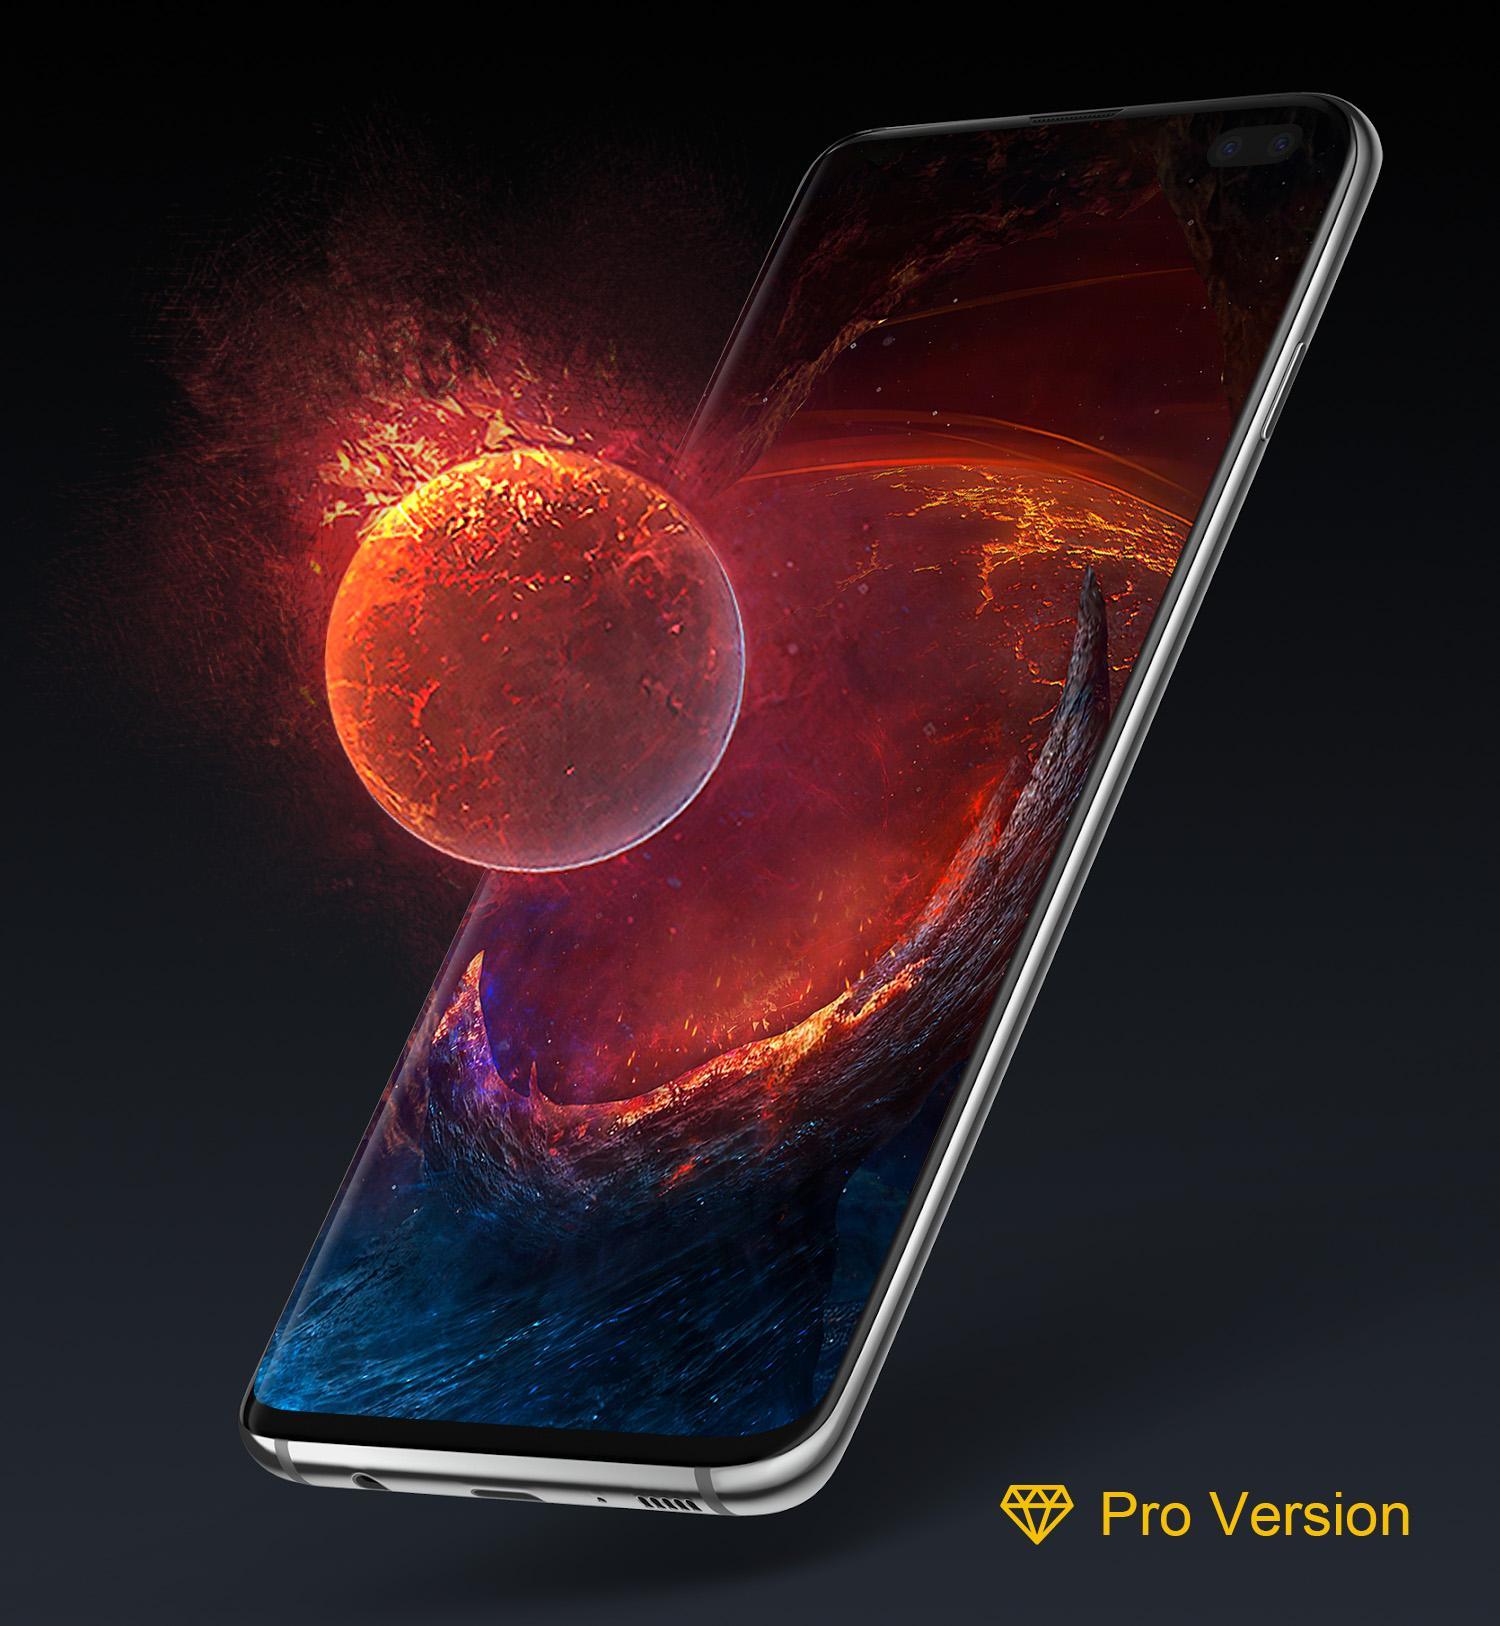 3D Parallax Live Wallpaper Pro Latest Version 2.1 for Android